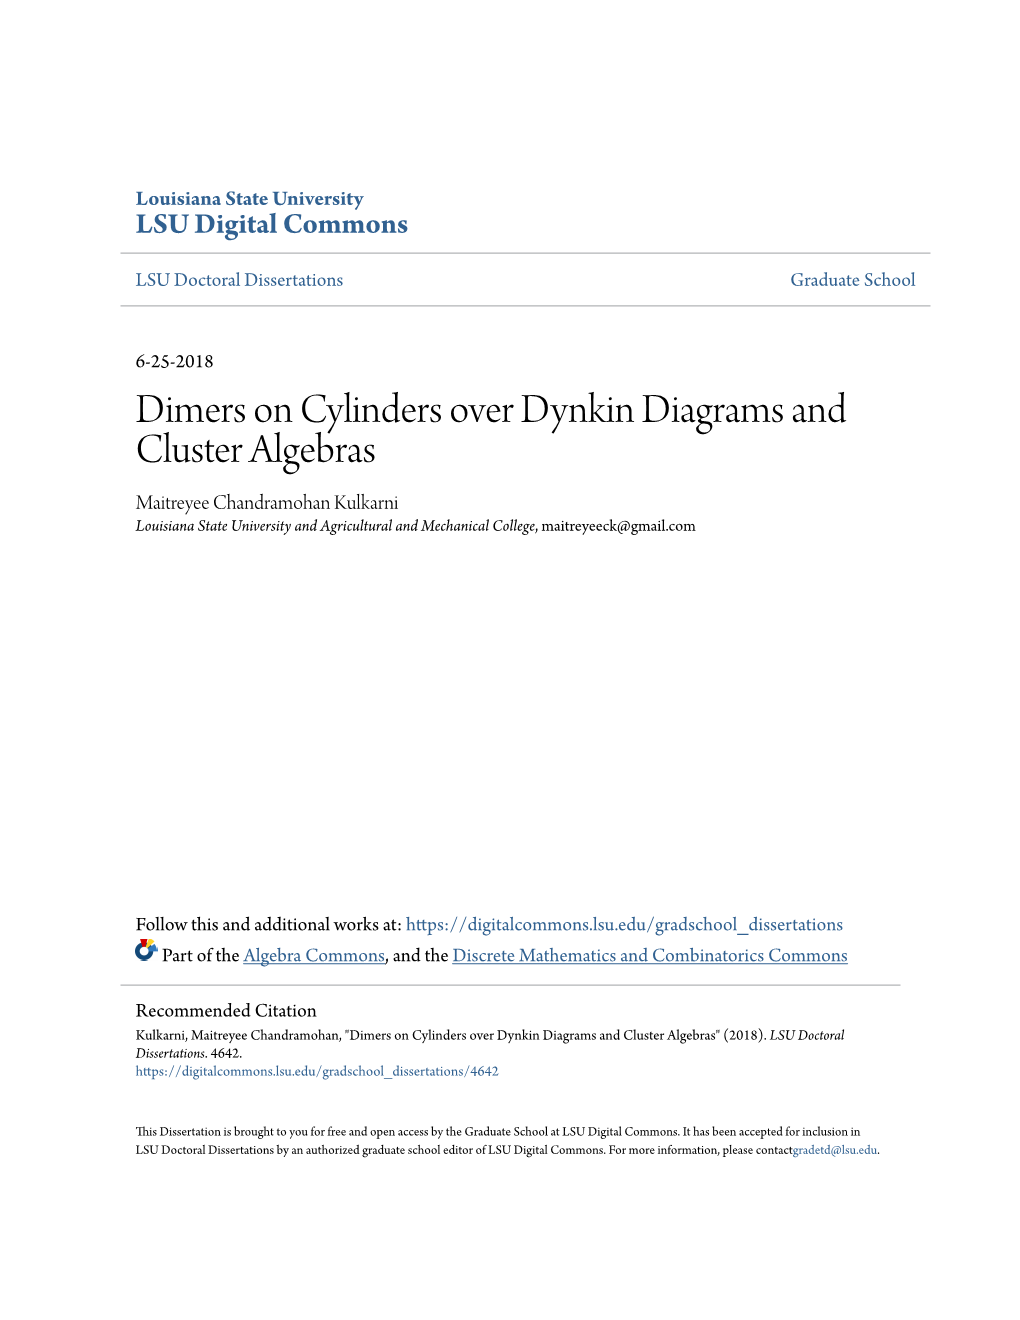 Dimers on Cylinders Over Dynkin Diagrams and Cluster Algebras